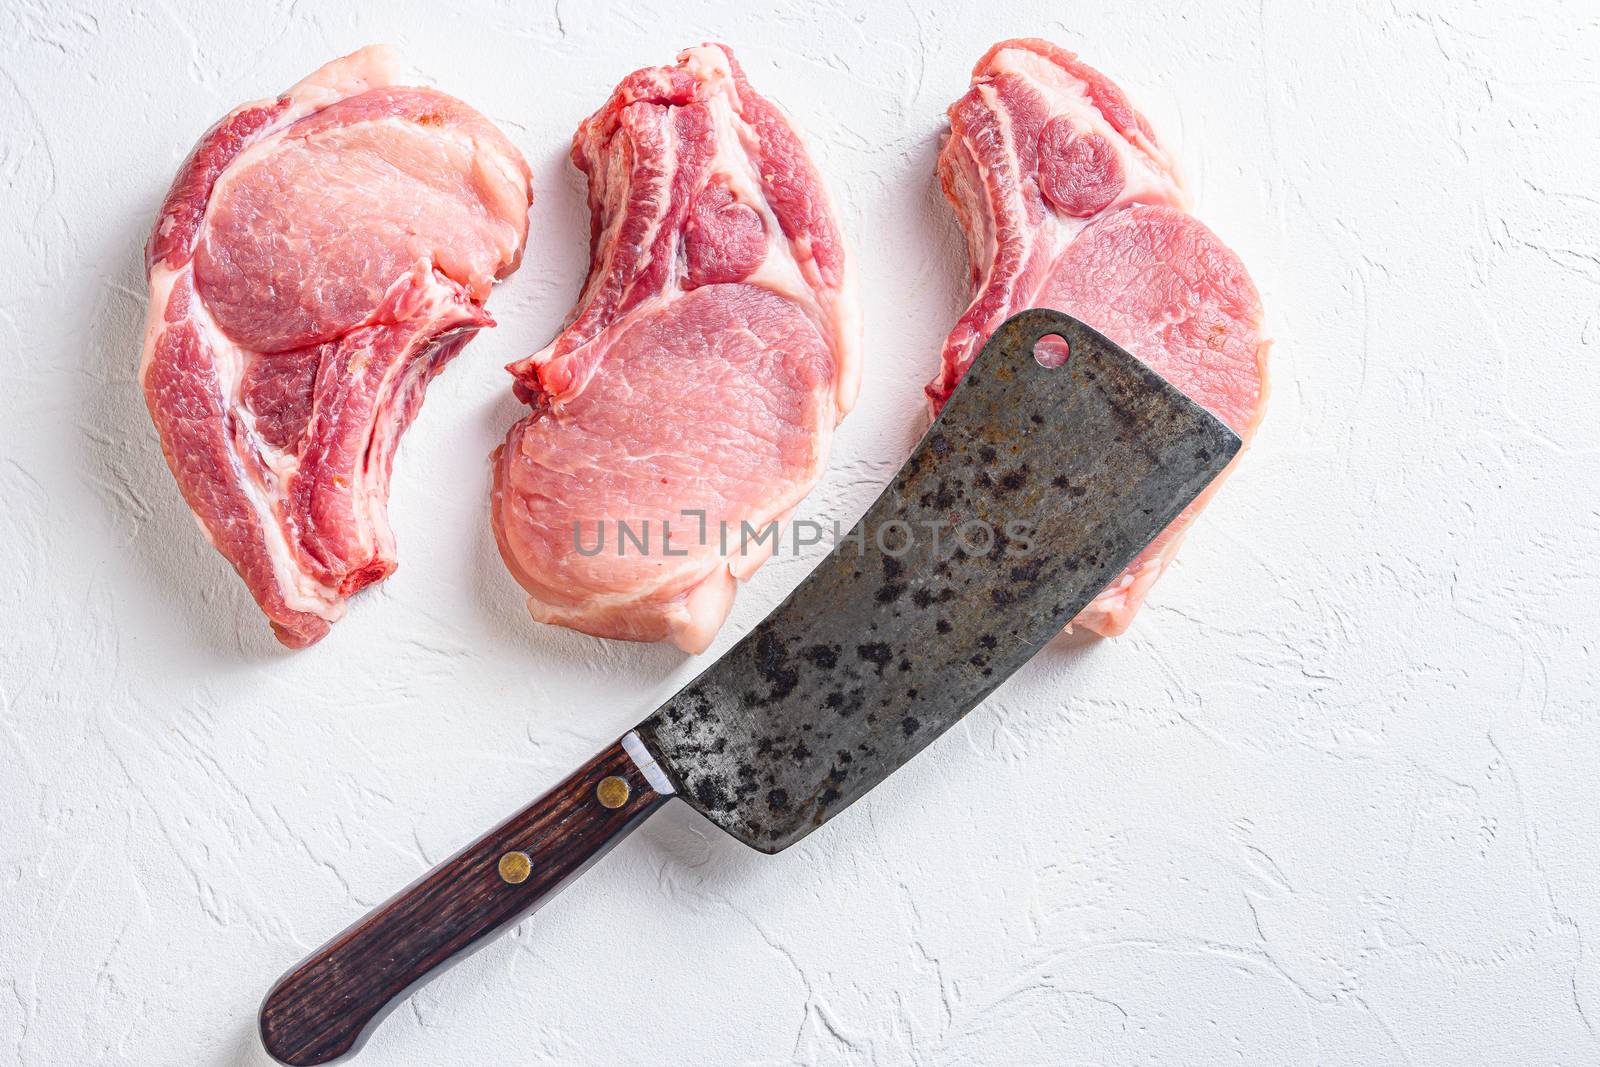 Butcher cleaver over organic bio Raw pork chops set for grilling, baking or frying, textured white background. horizontal by Ilianesolenyi